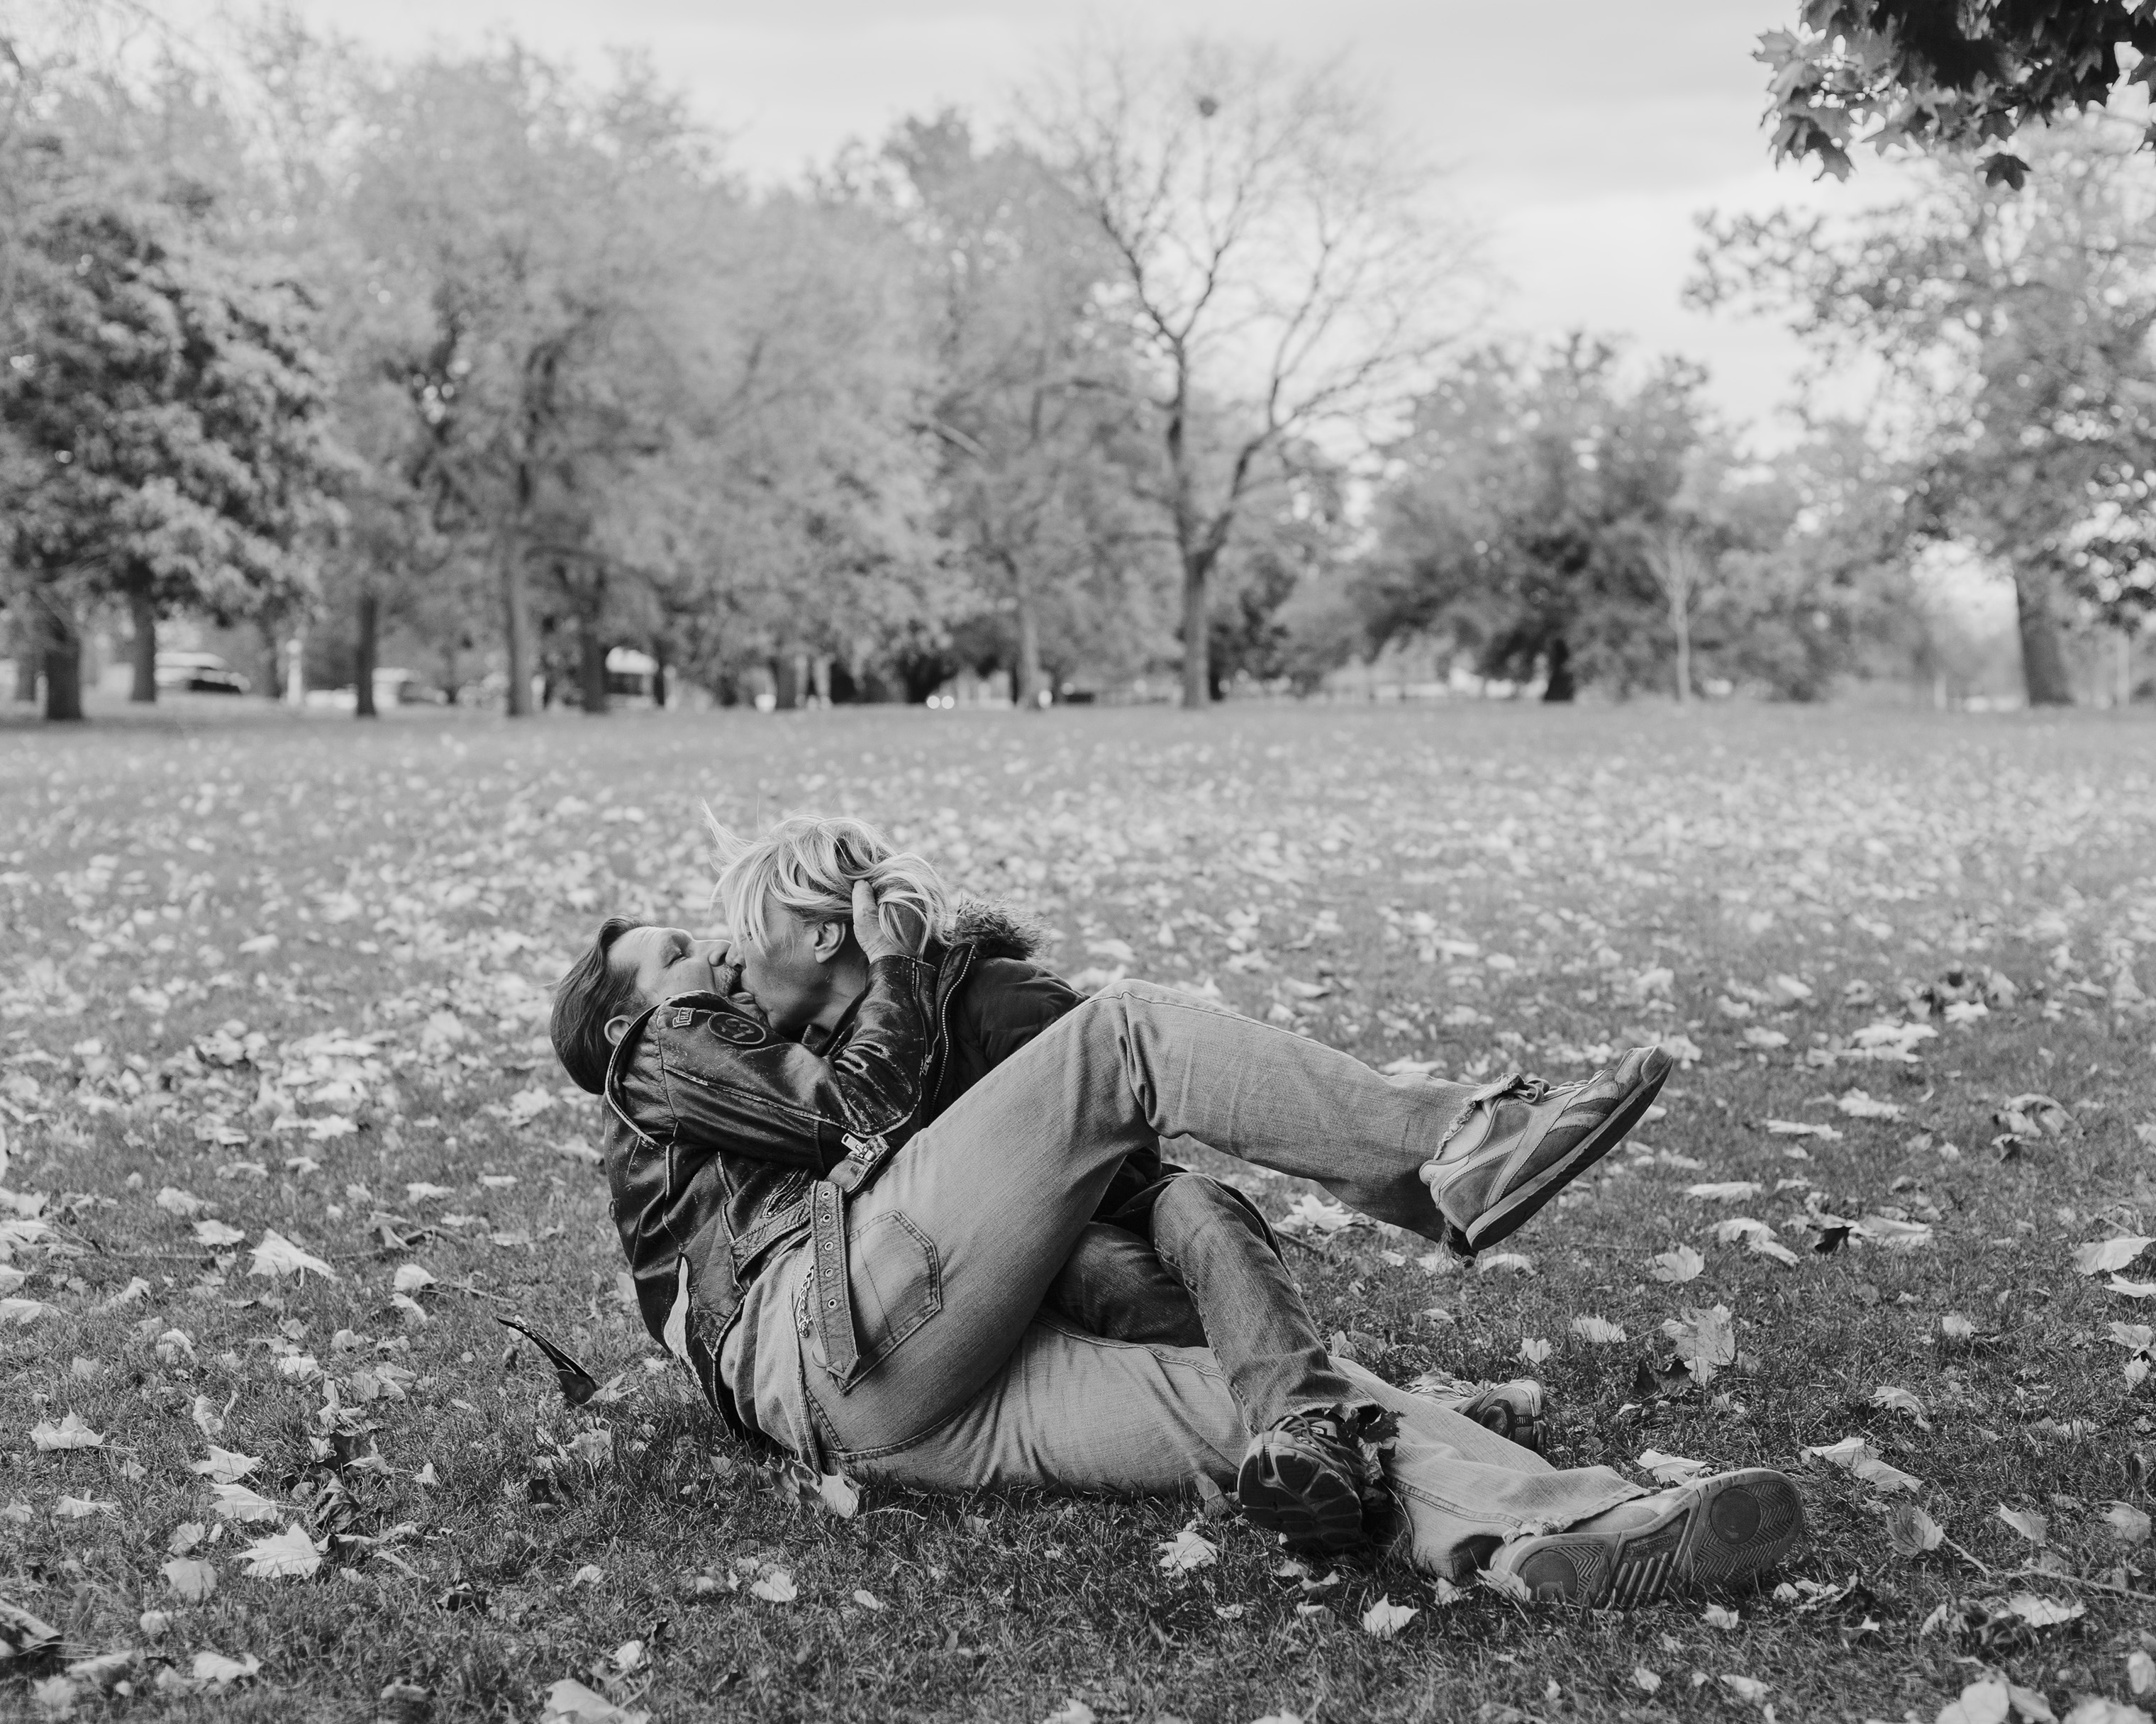 Couple in Park, 2016, featured in the "New Southern Photography" exhibition. (Whitten Sabbatini—Ogden Museum of Southern Art)